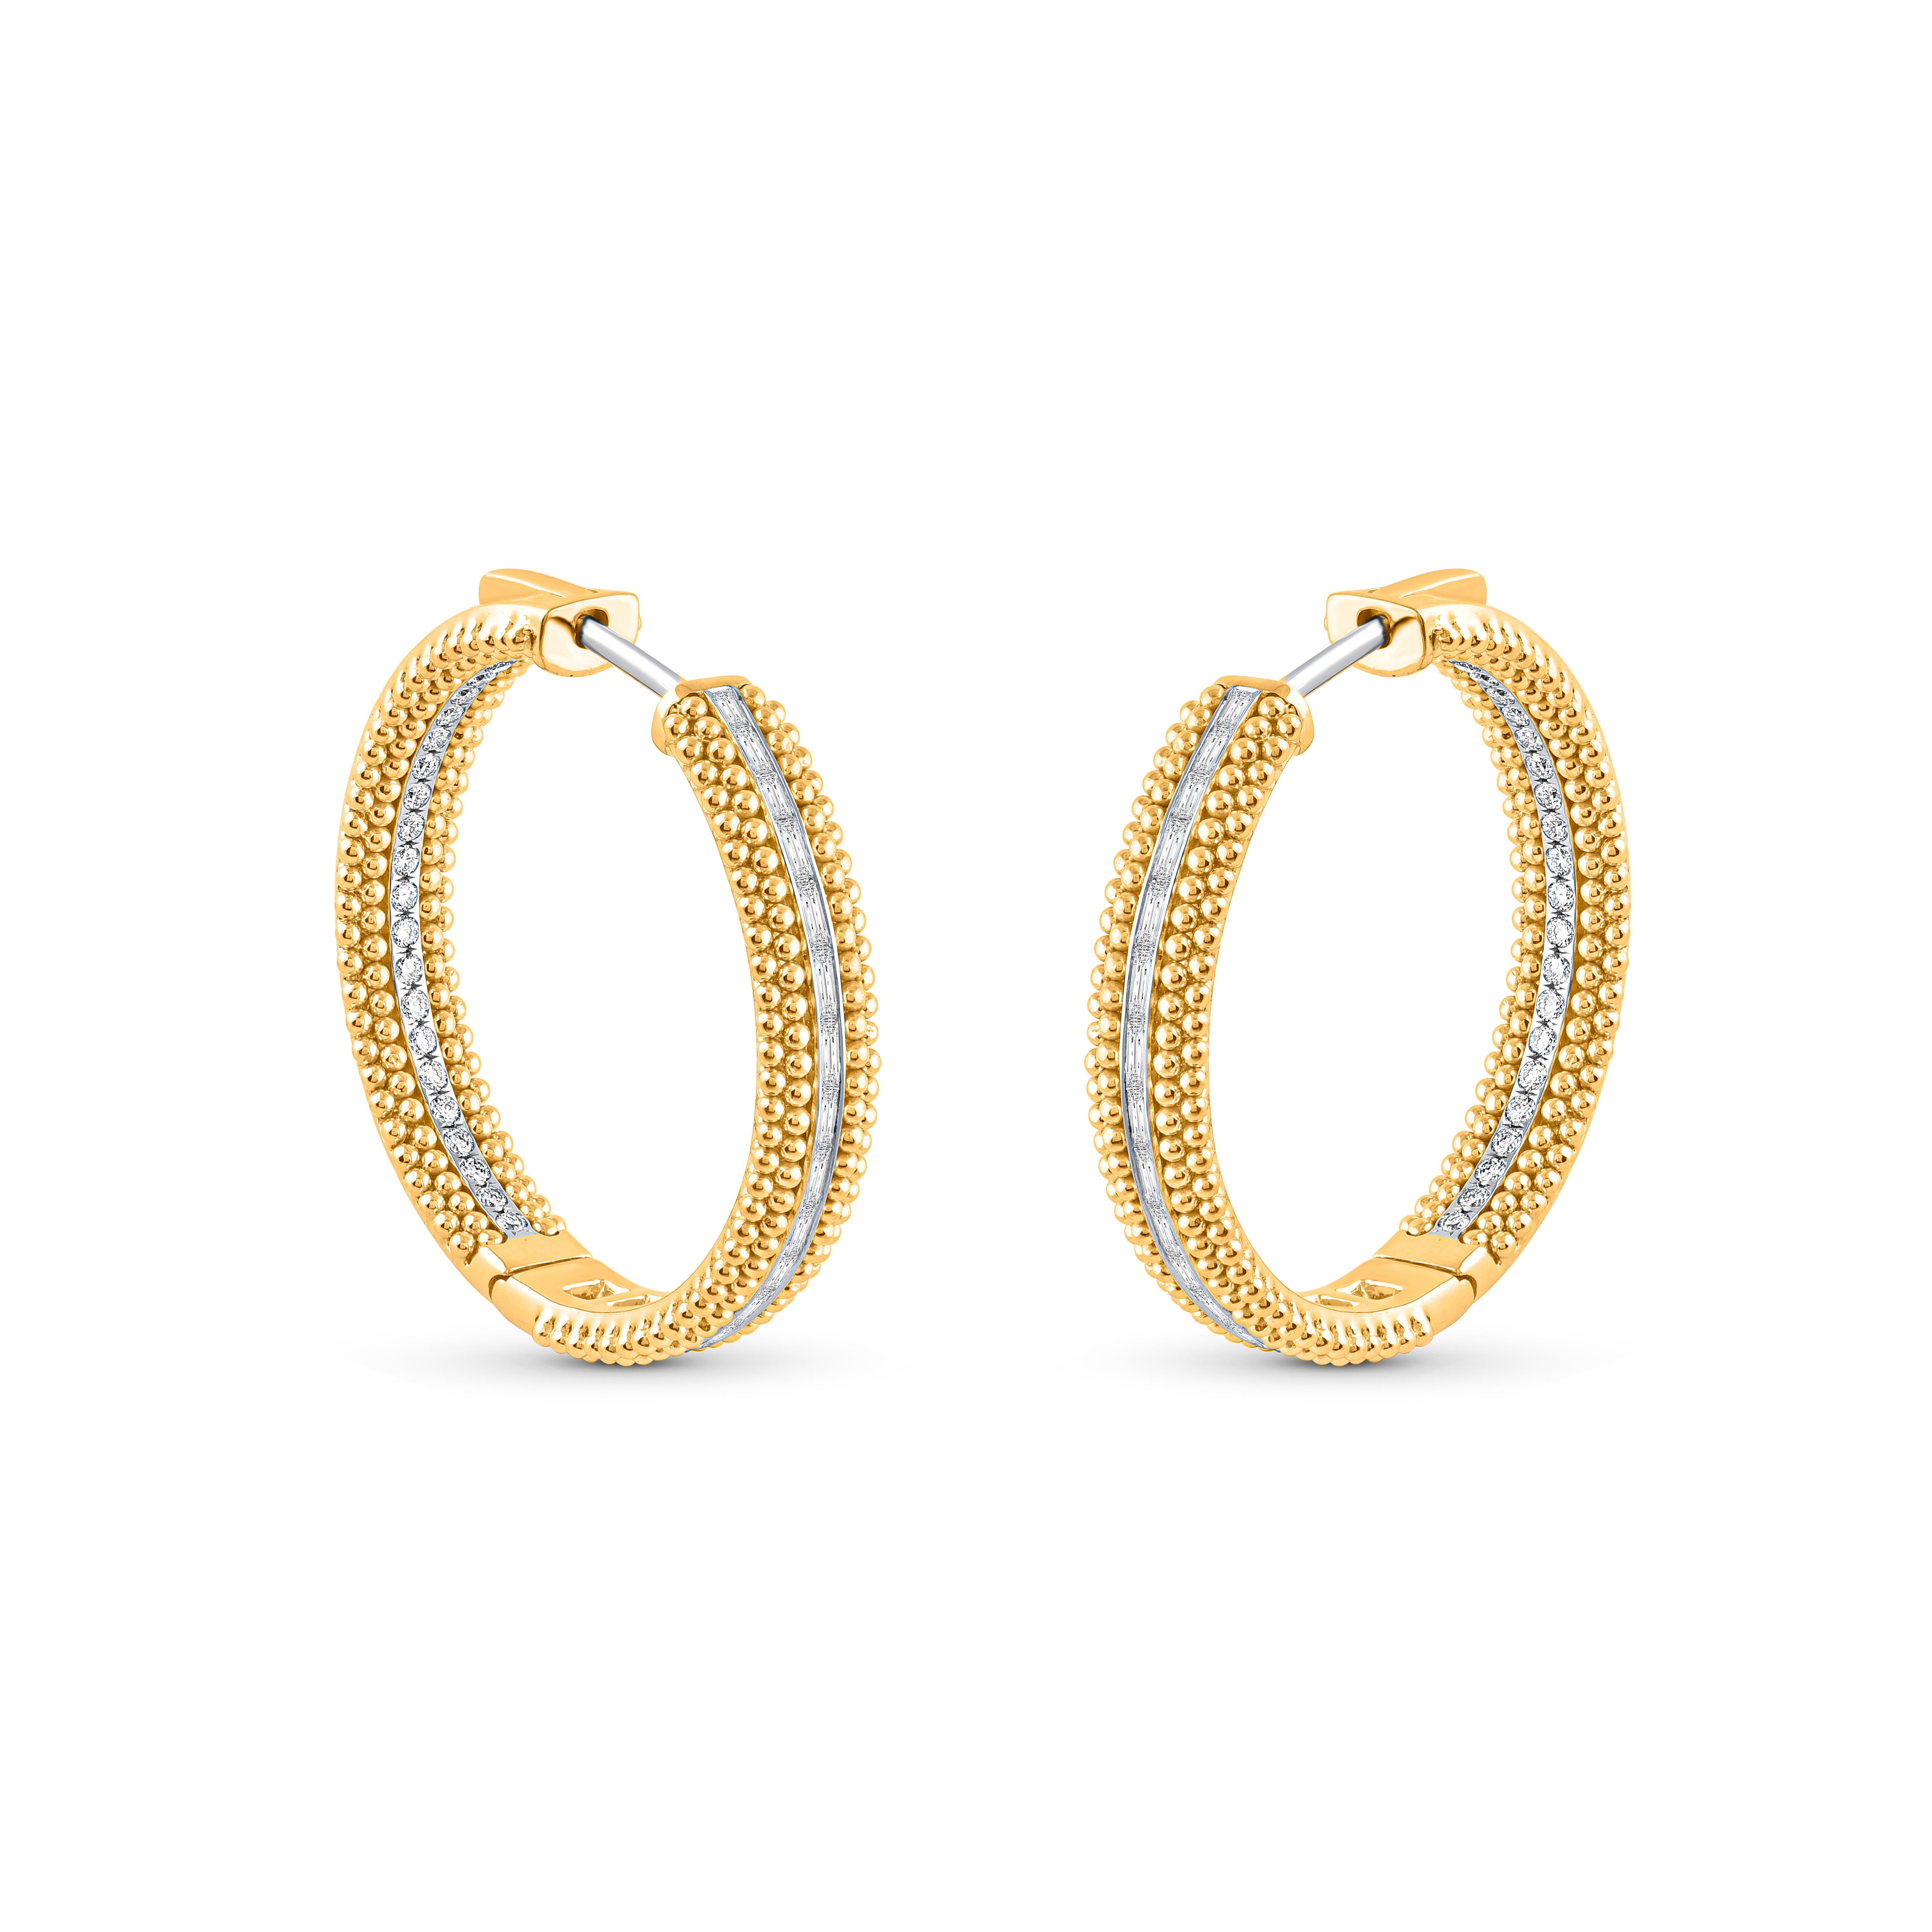 Inspired by the journey of the sun’s rays traveling through space and time to brighten our world, these earrings are a unique spin on the popular paper clip earrings. Style these gold earrings with your everyday work wear and for an evening dinner